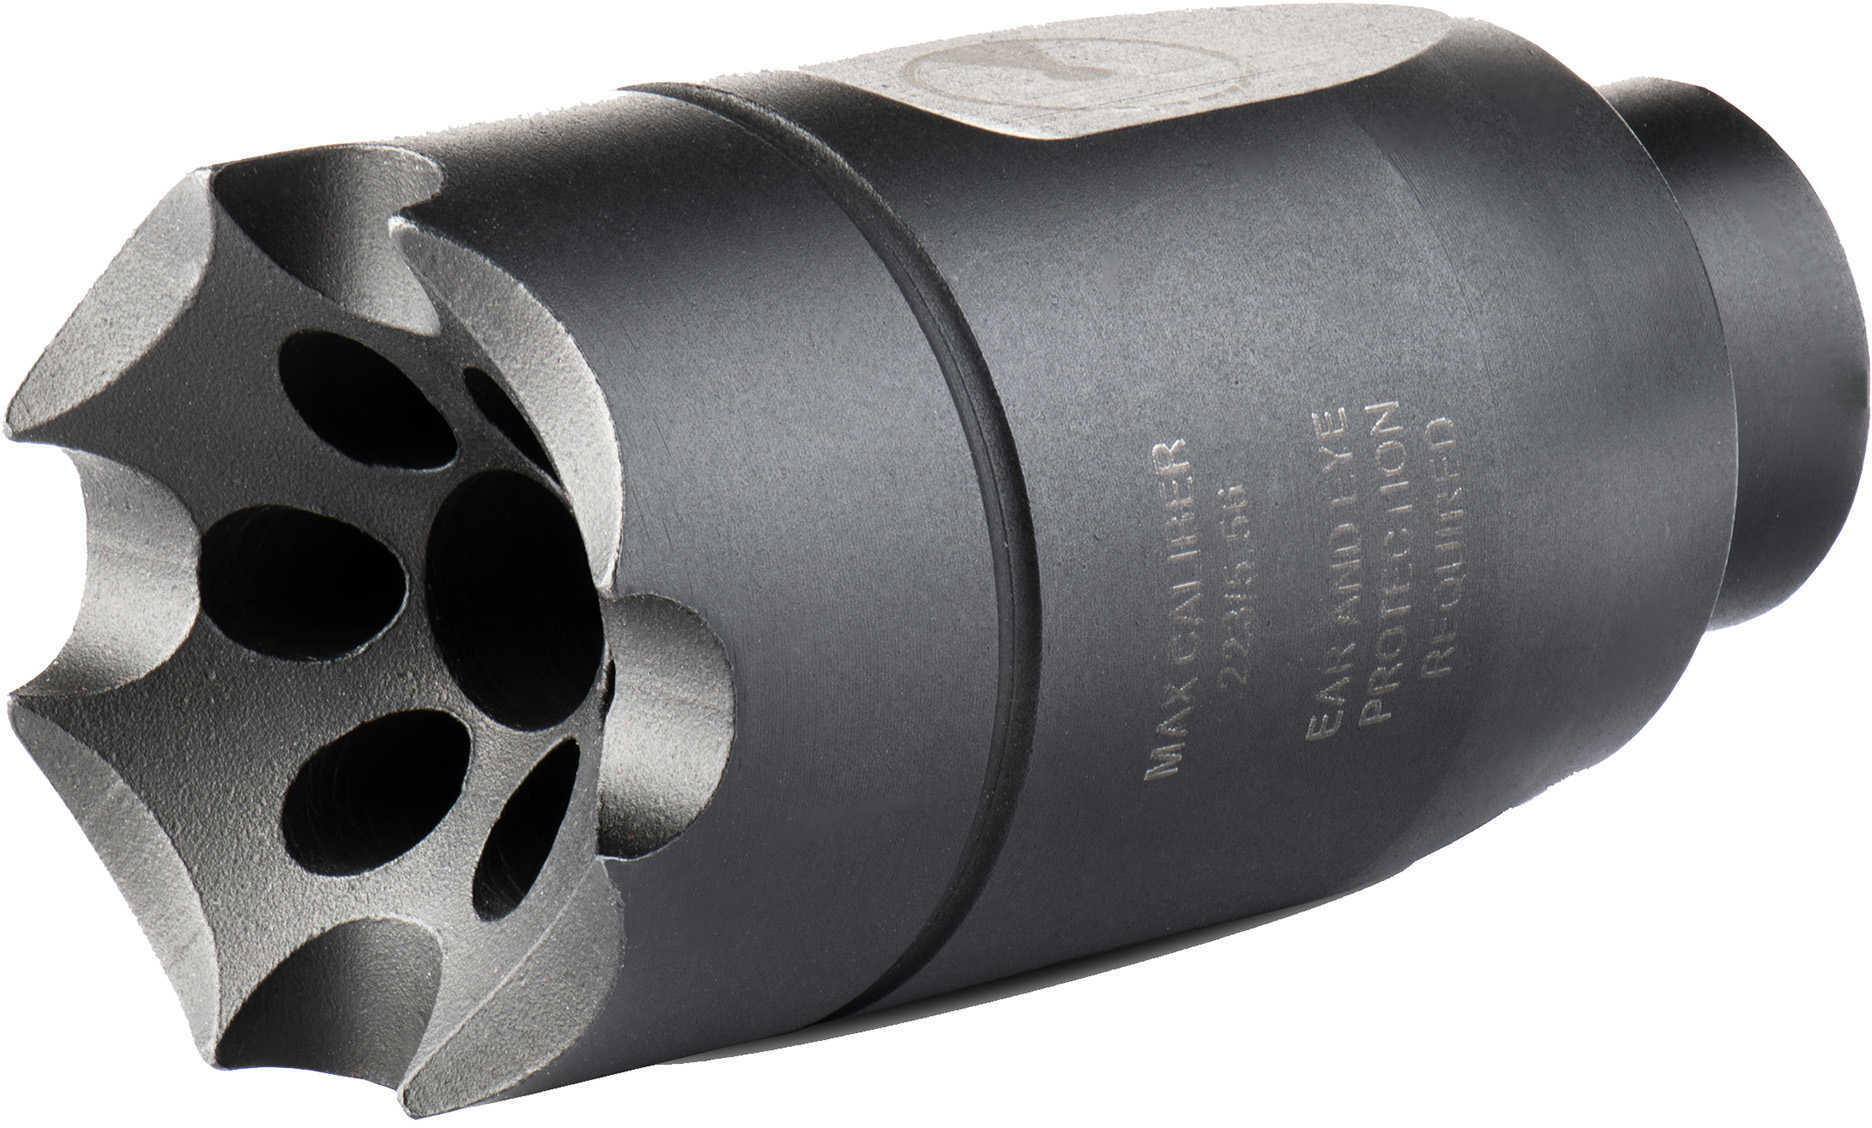 Ultradyne USA ATHENA Linear Compensator 5.56MM/223REM Fits AR-15s with 1/2X28 Threads Black 3.8 oz. 416 Stainless Steel